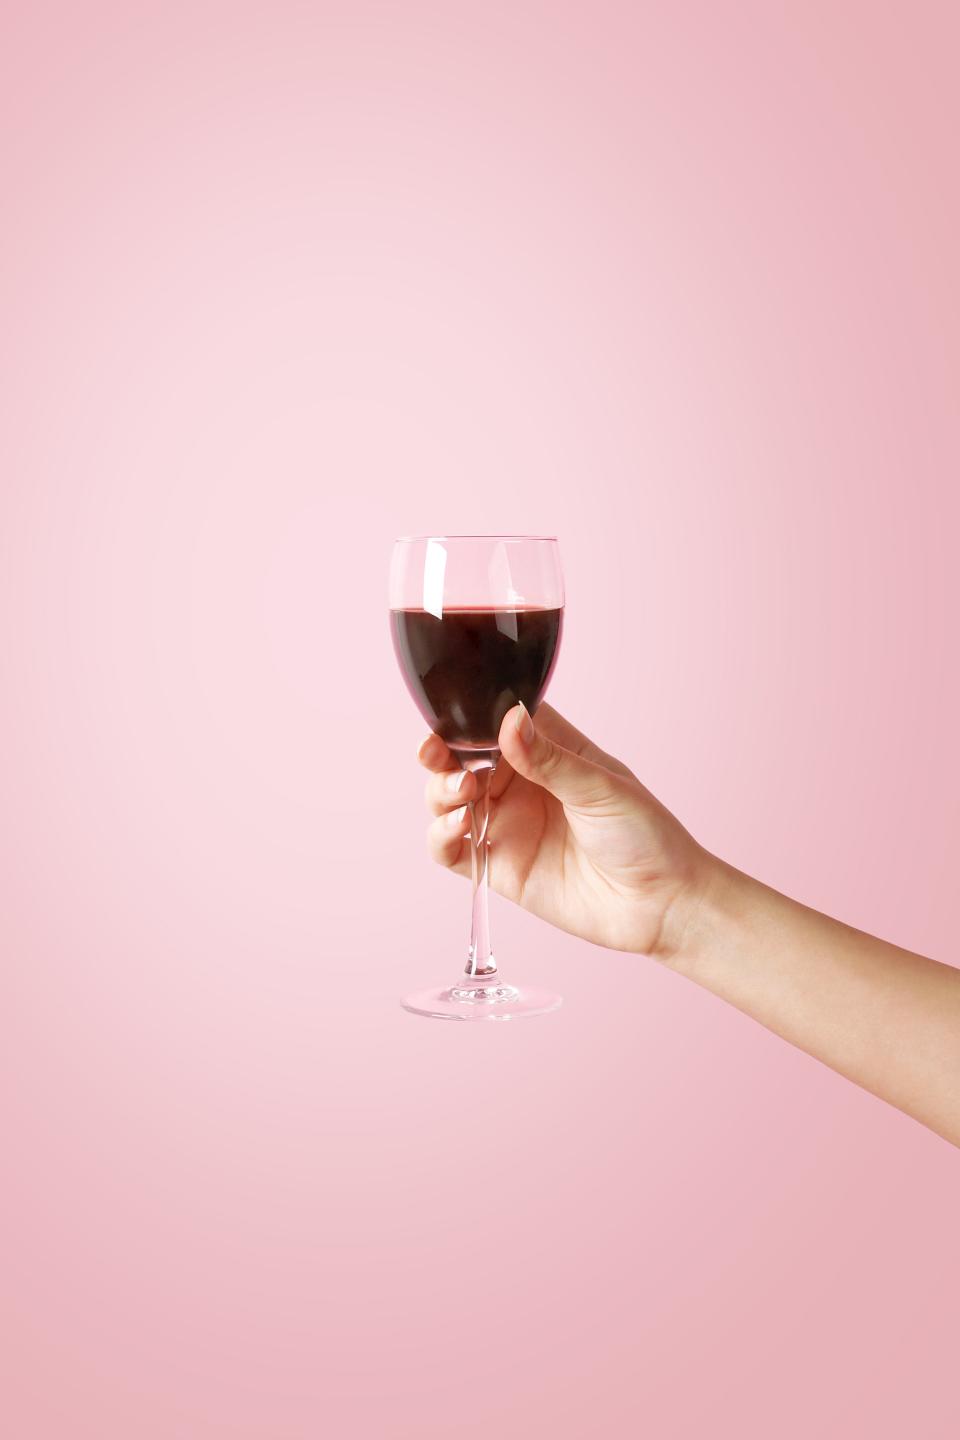 Red wine glass held against a pink background.